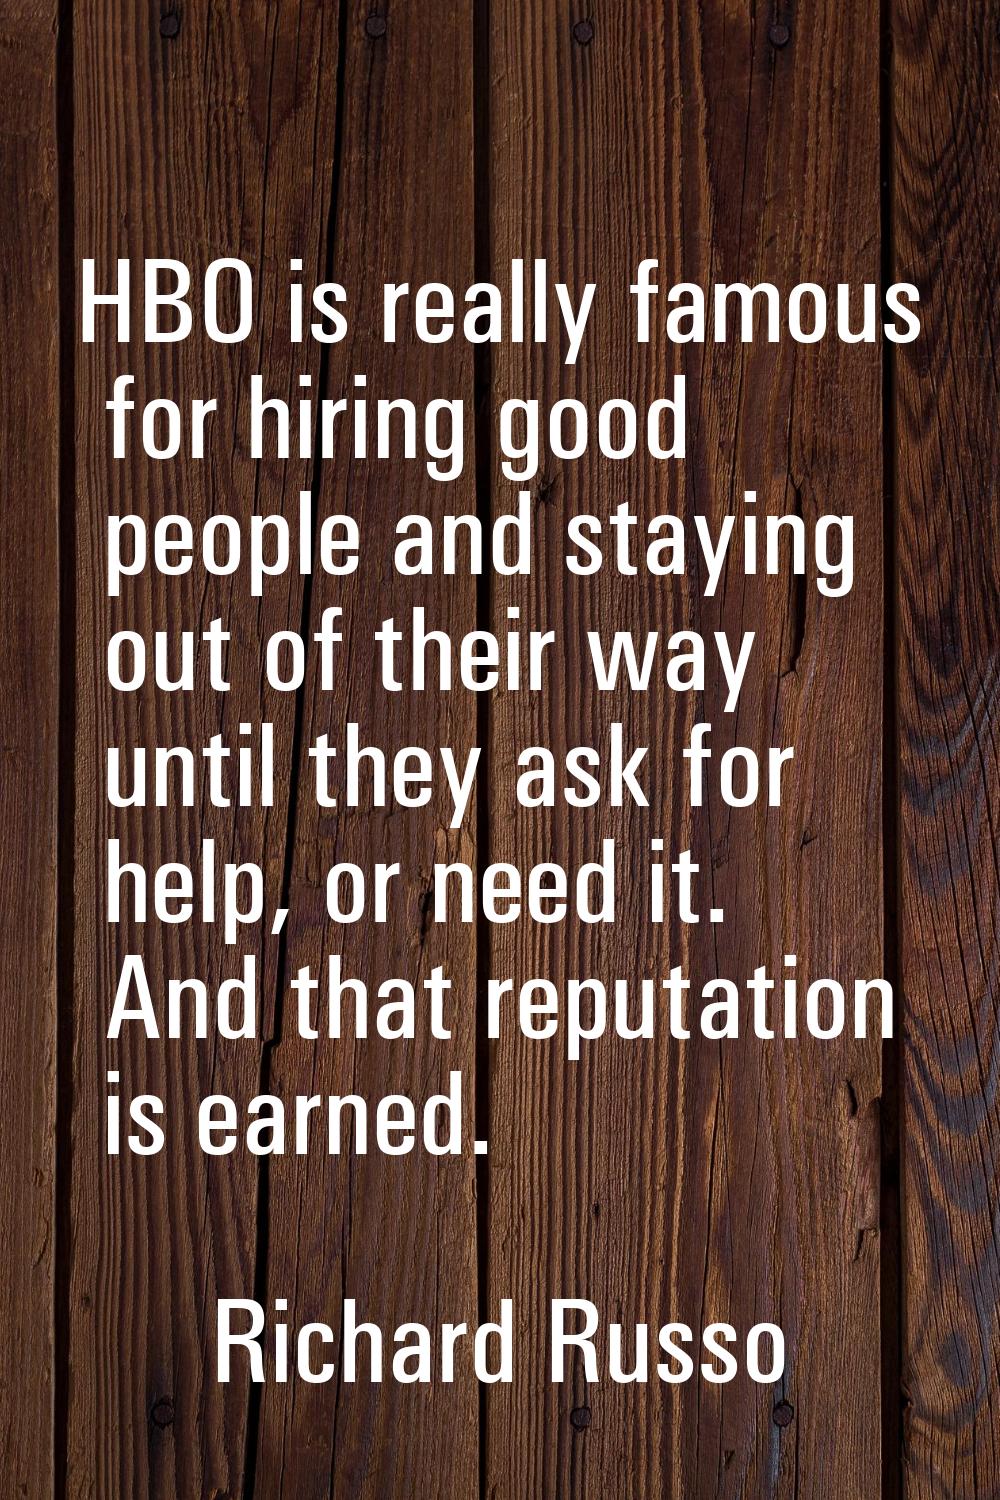 HBO is really famous for hiring good people and staying out of their way until they ask for help, o